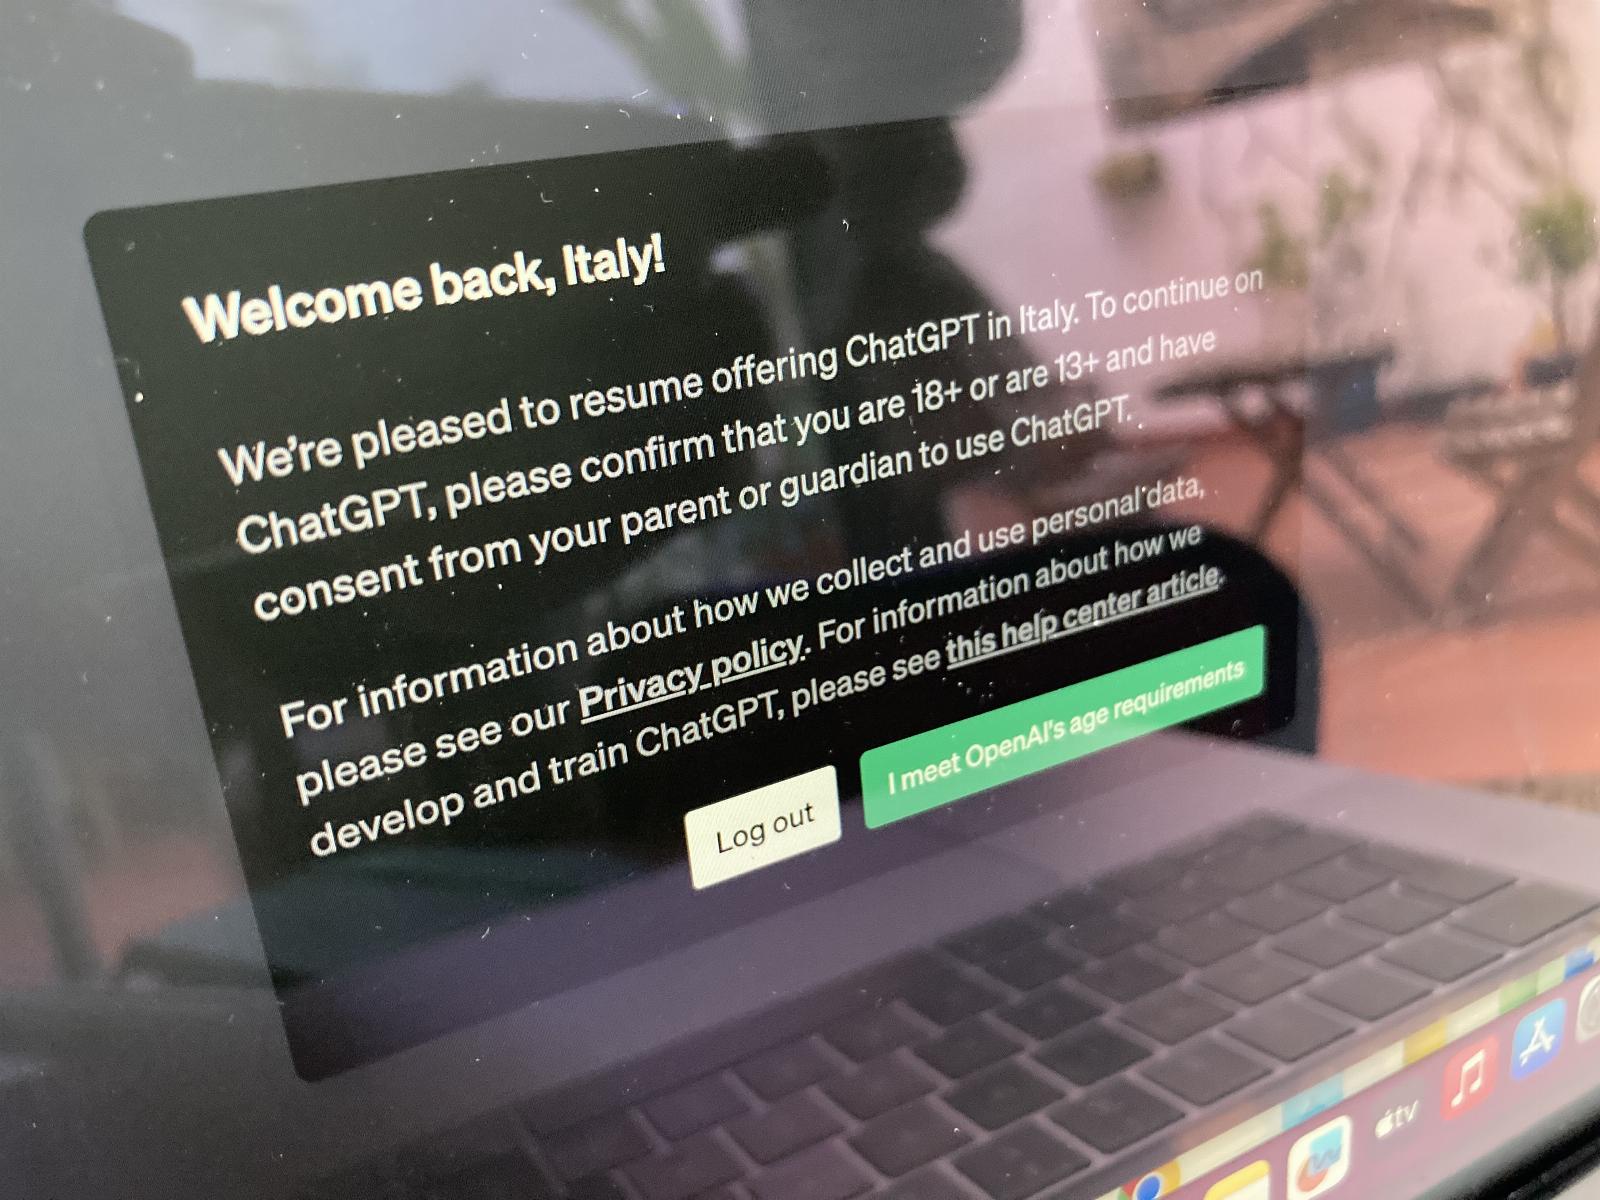 ChatGPT resumes service in Italy after adding privacy disclosures and controls